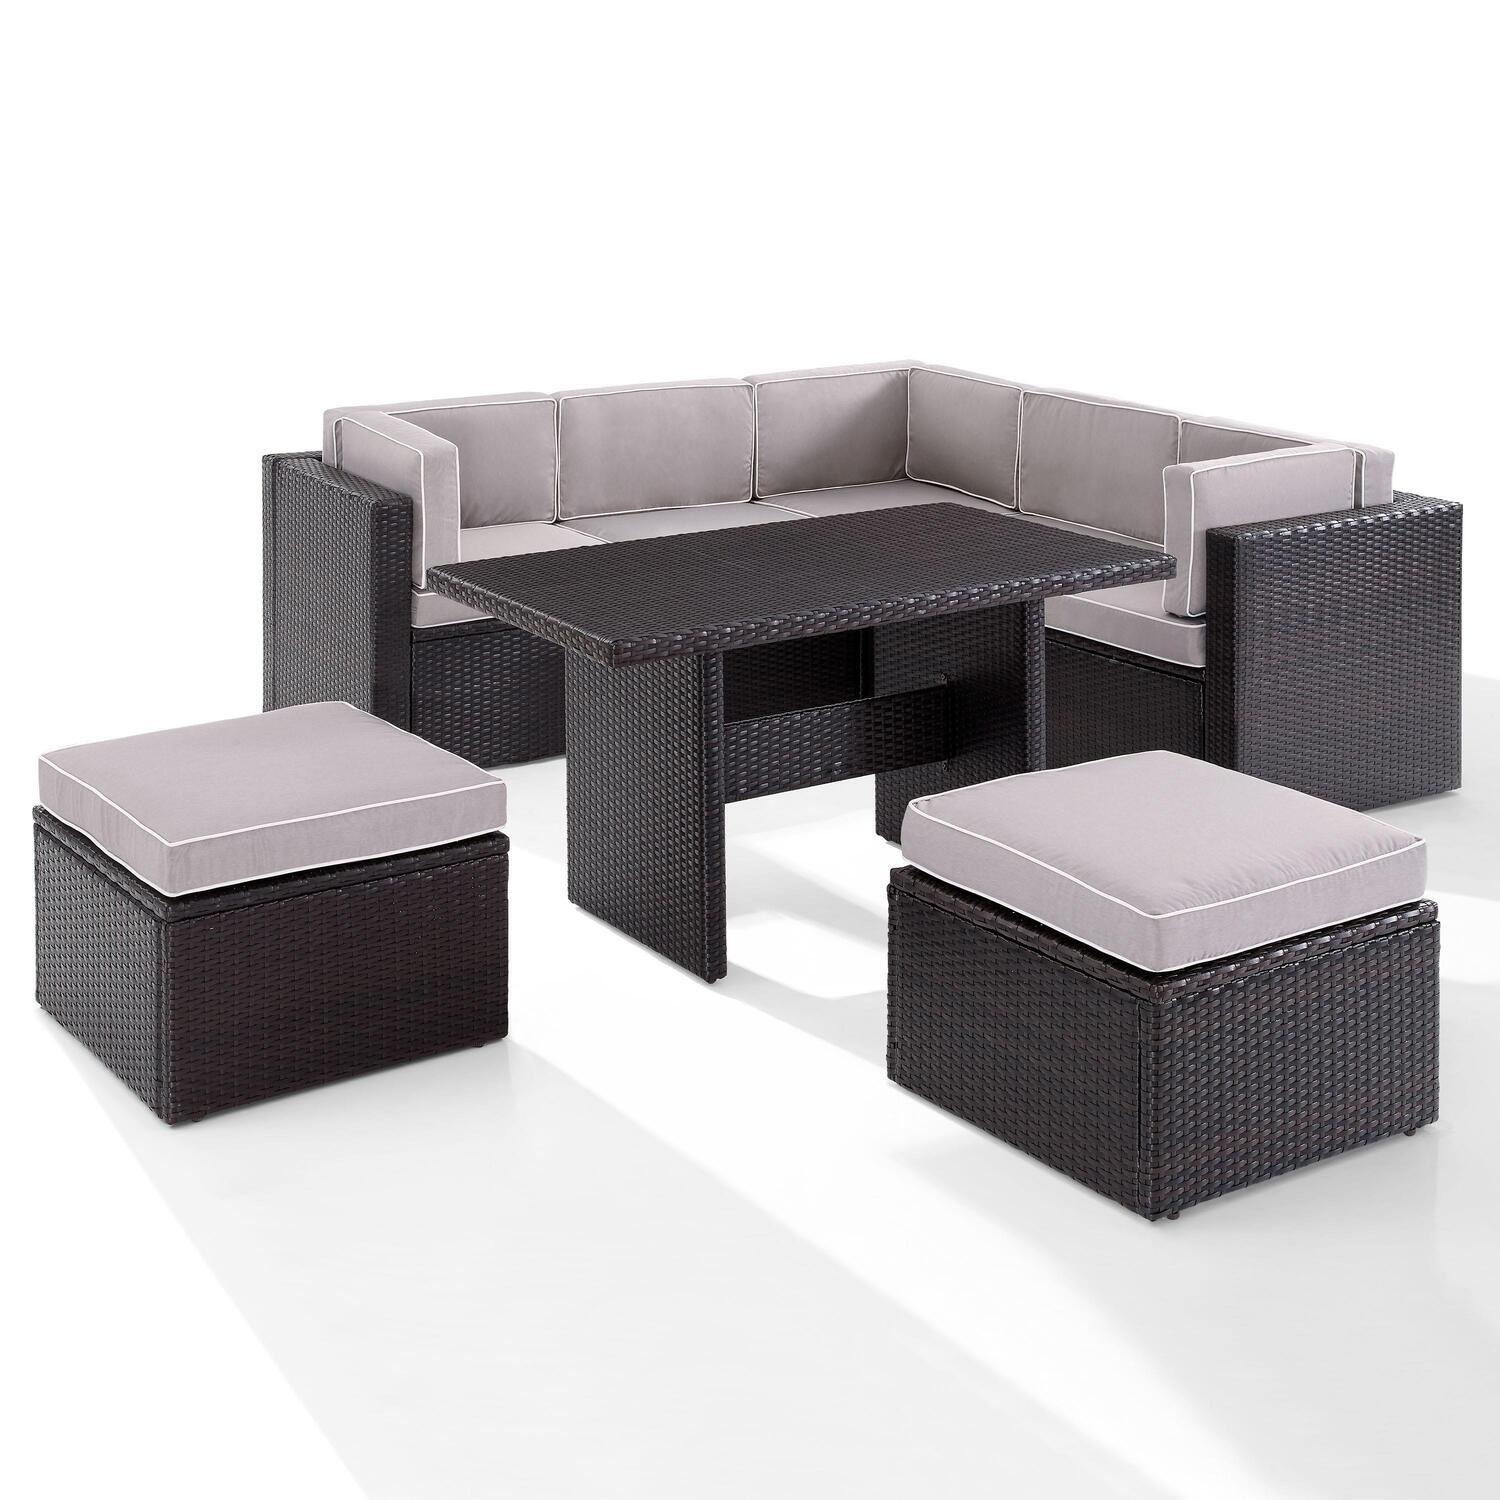 Crosley Palm Harbor 8Pc Outdoor Wicker Sectional Set- 3 Corner Chairs, 2 Center Chairs, 2 Ottomans, Cocktail Table - image 1 of 10